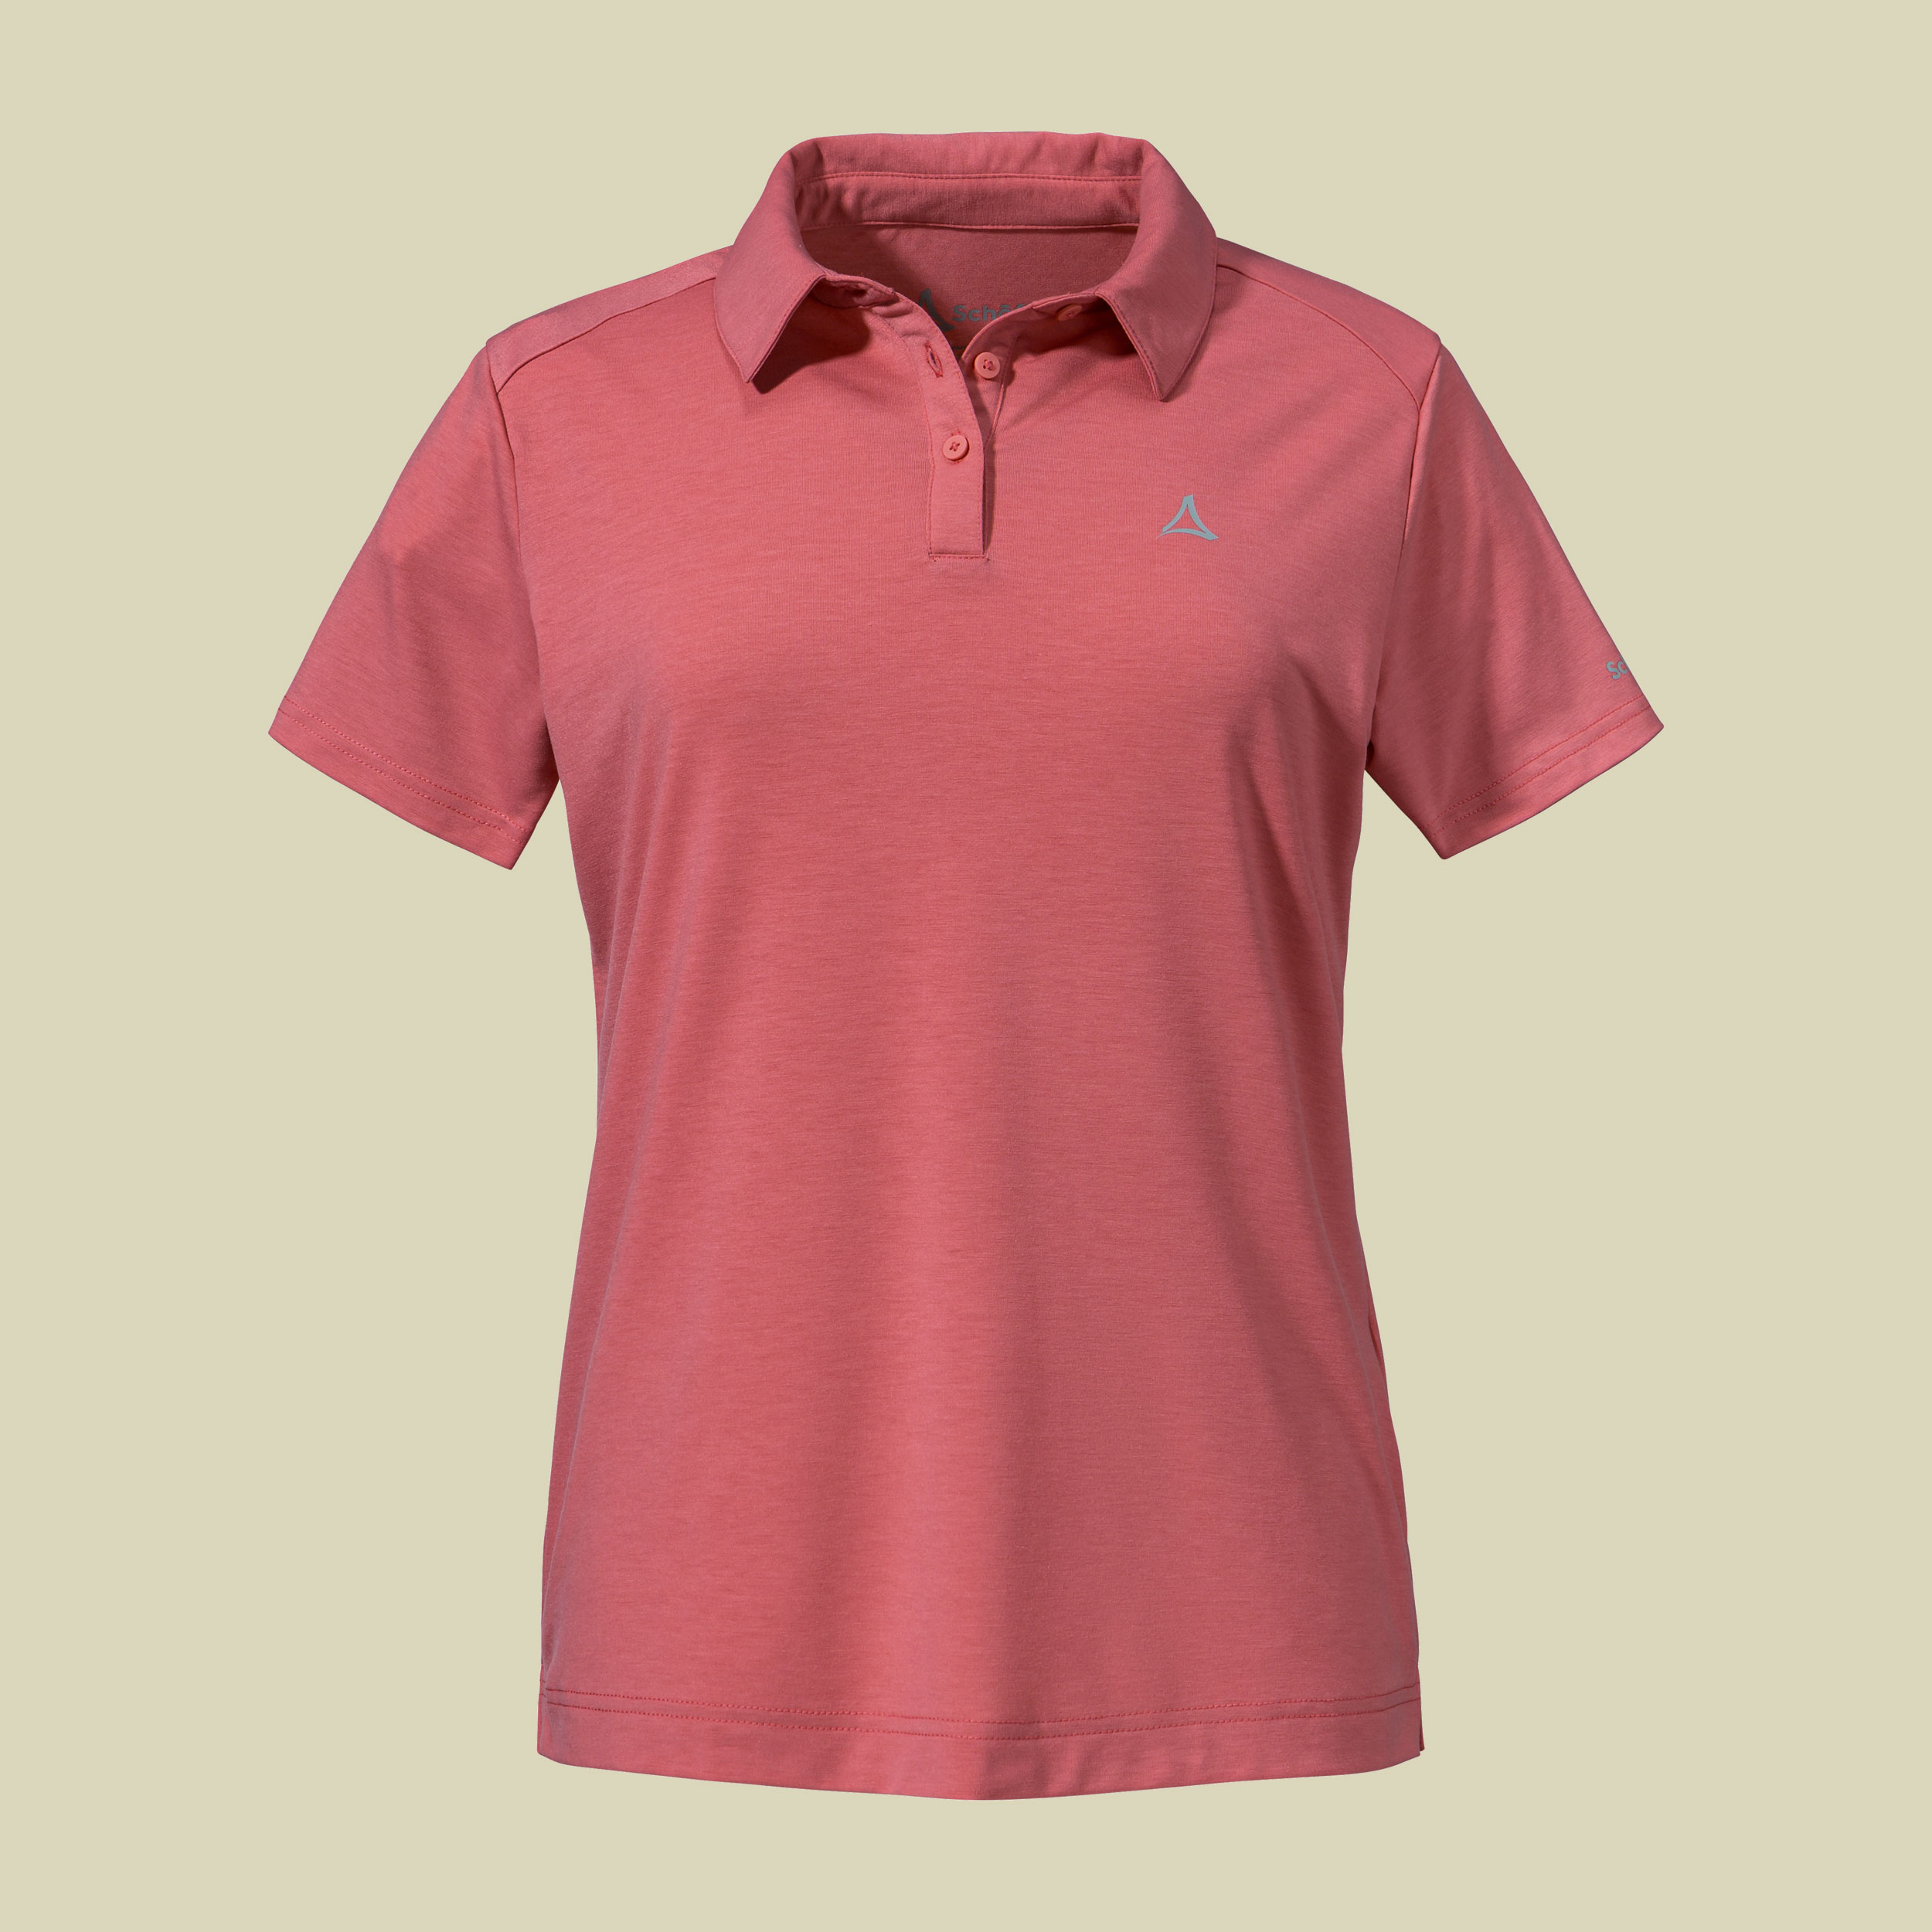 Polo Shirt Ramseck L Women 36 rot - clasping rose